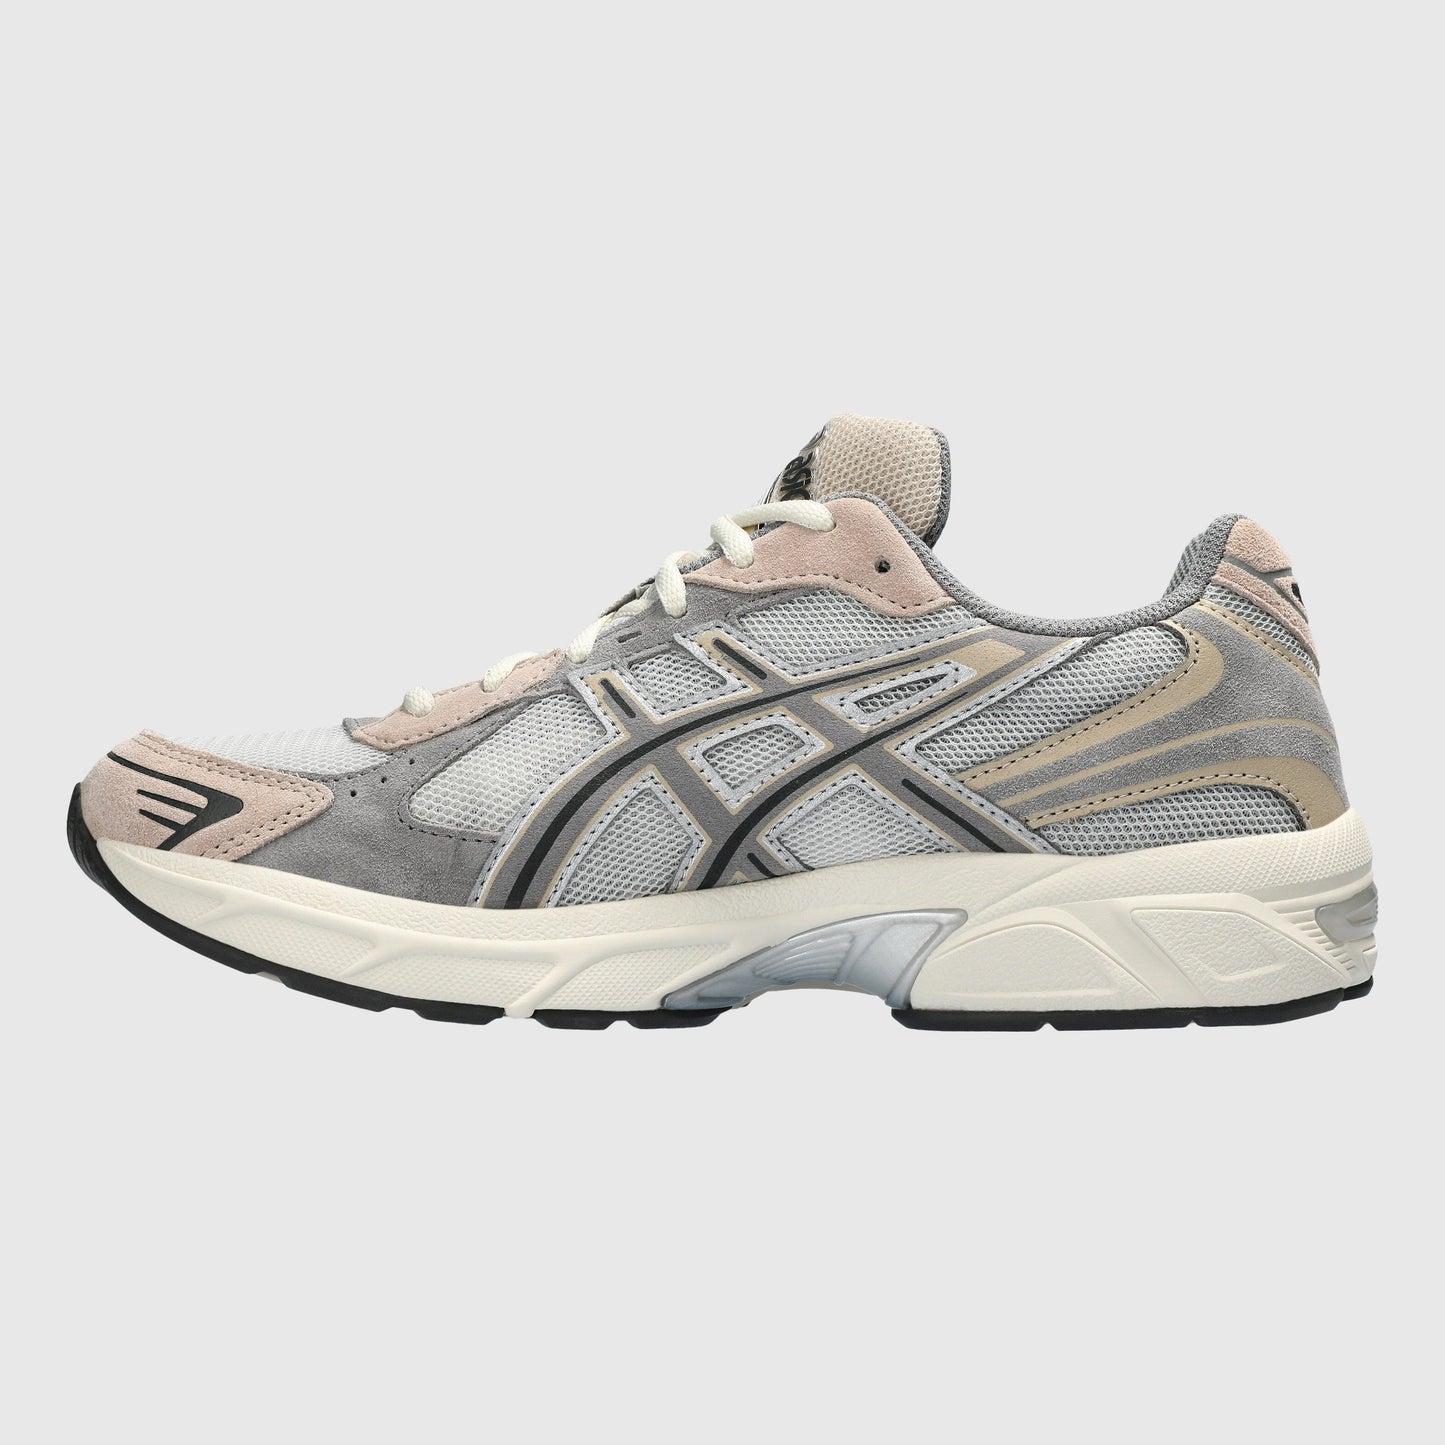 Asics Gel-1130 Sneakers - Oyster Grey / Clay Grey Sneakers Asics 